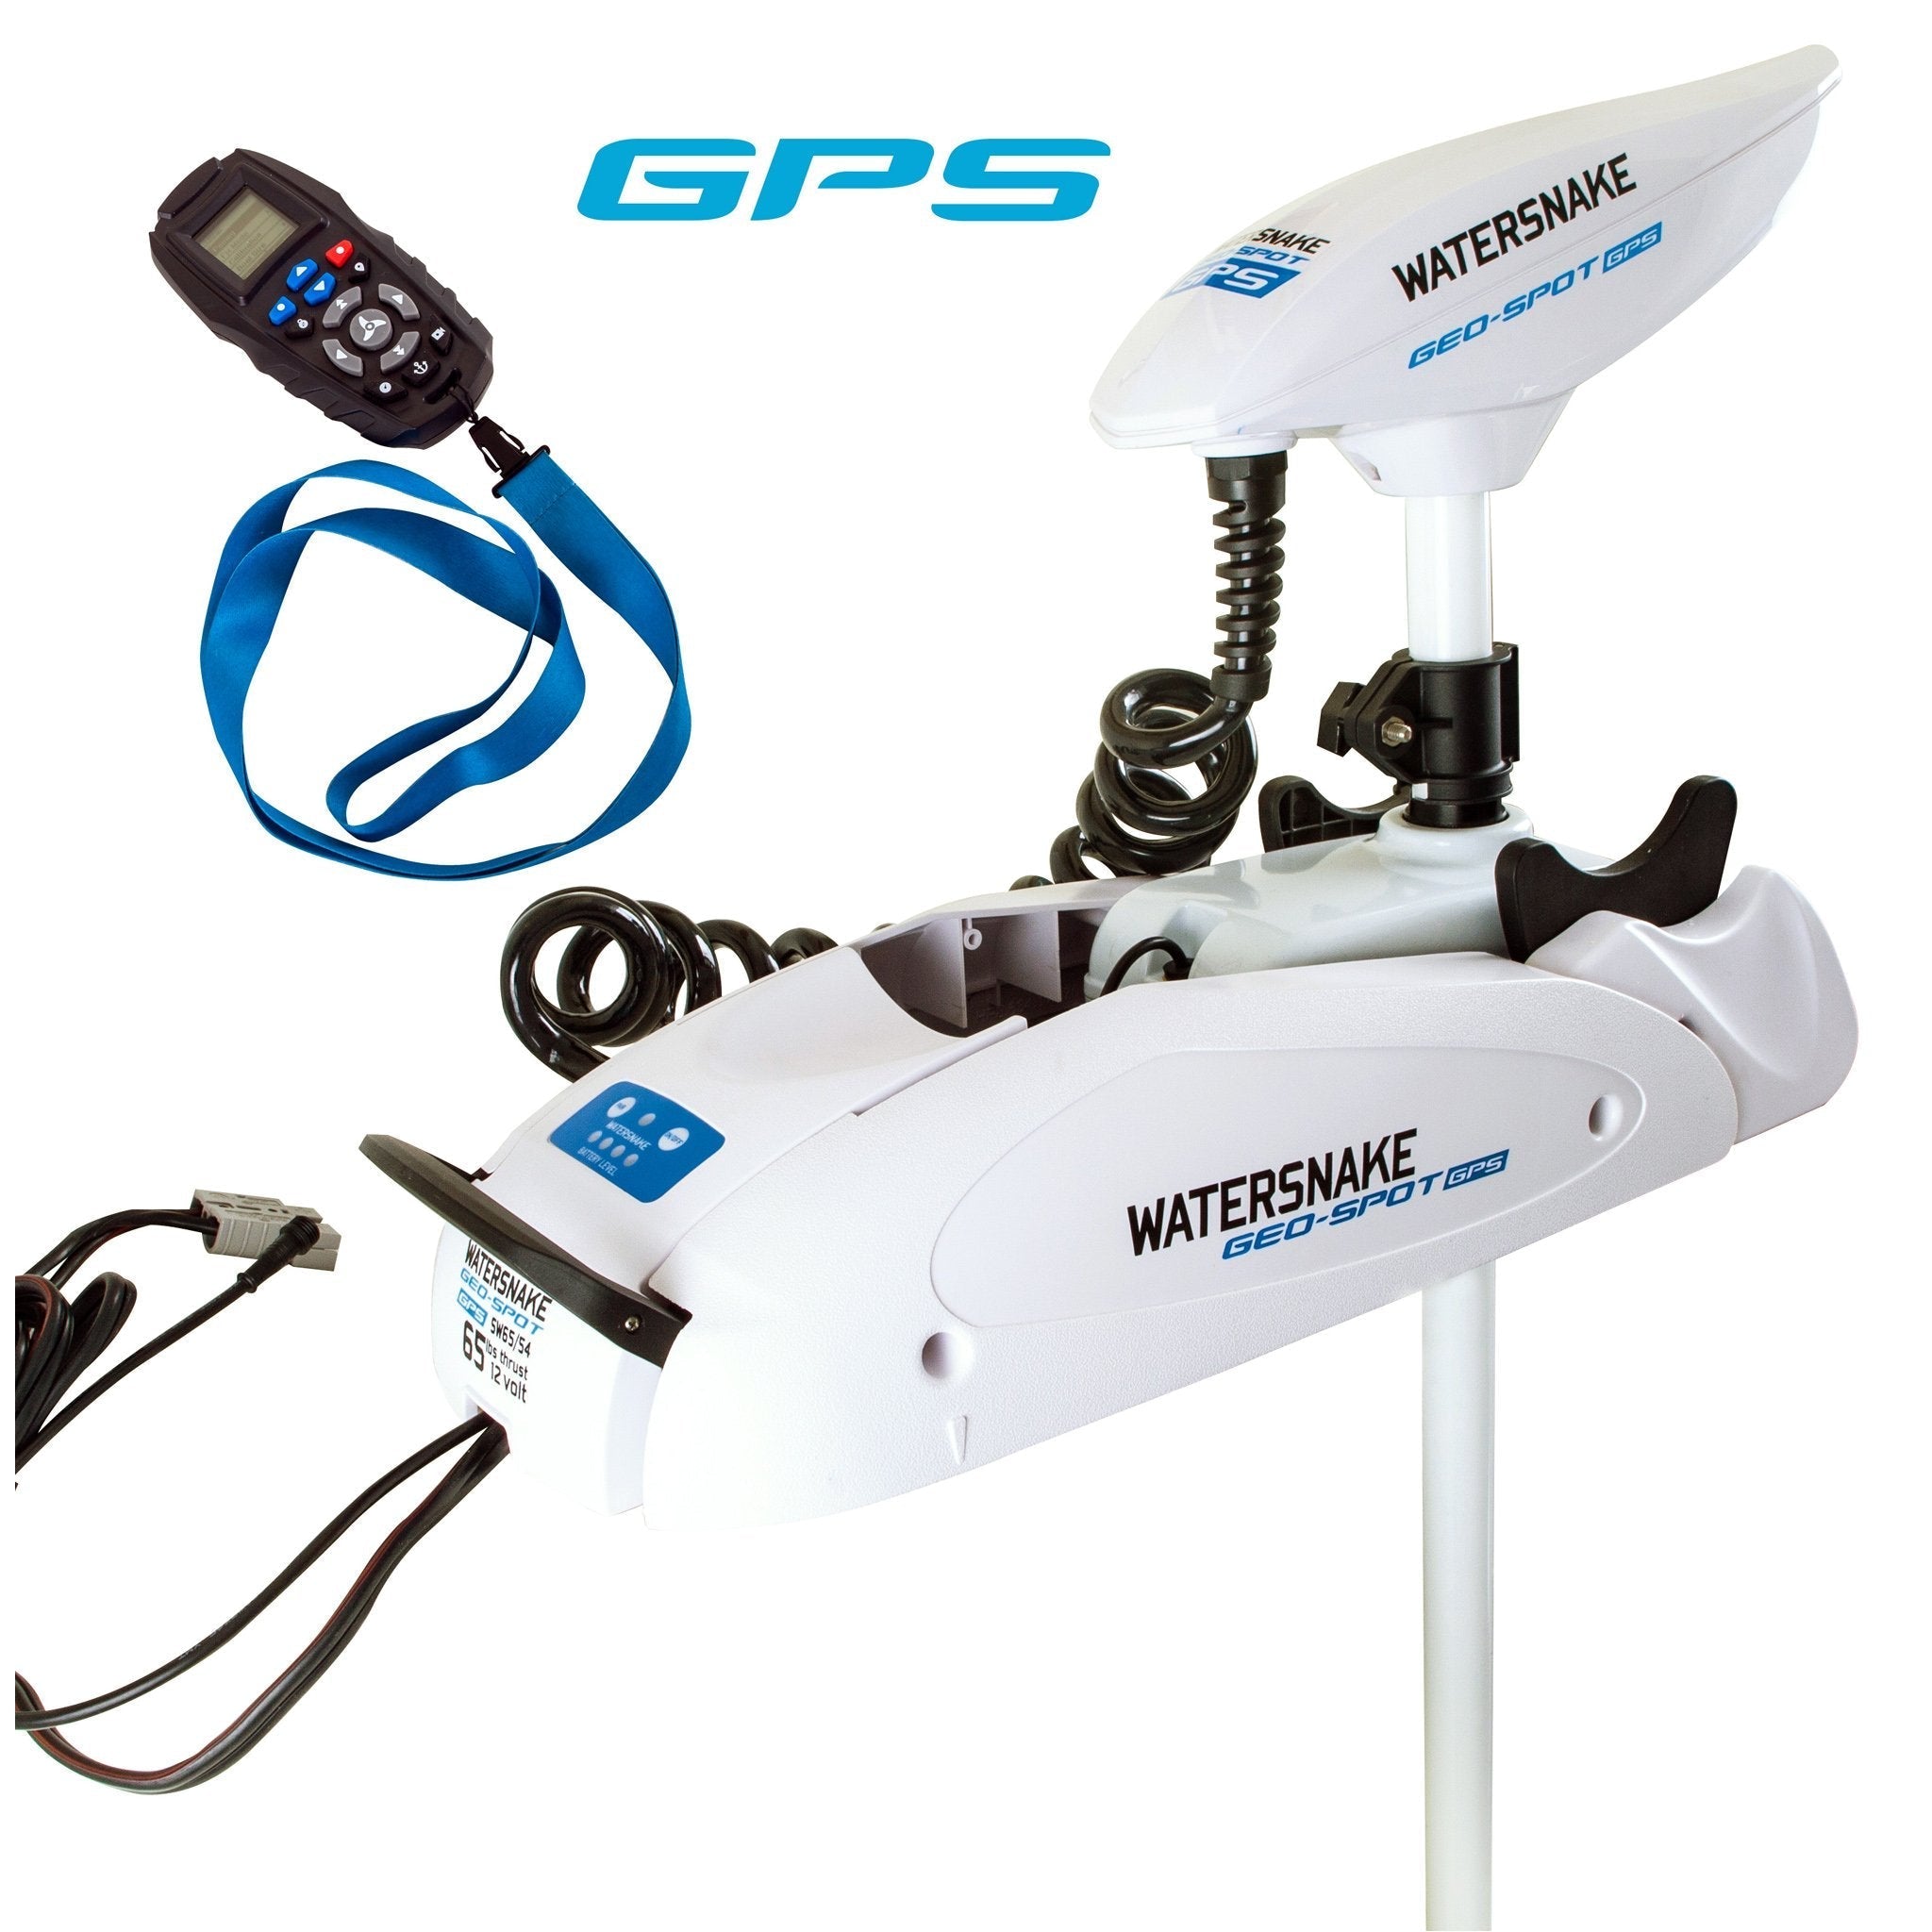 Morse code Speciaal attribuut Watersnake Geo Spot GPS 65lb Bow Mount Motors - Navigate and Fish with Ease  | Watersnake – watersnake.eu.com